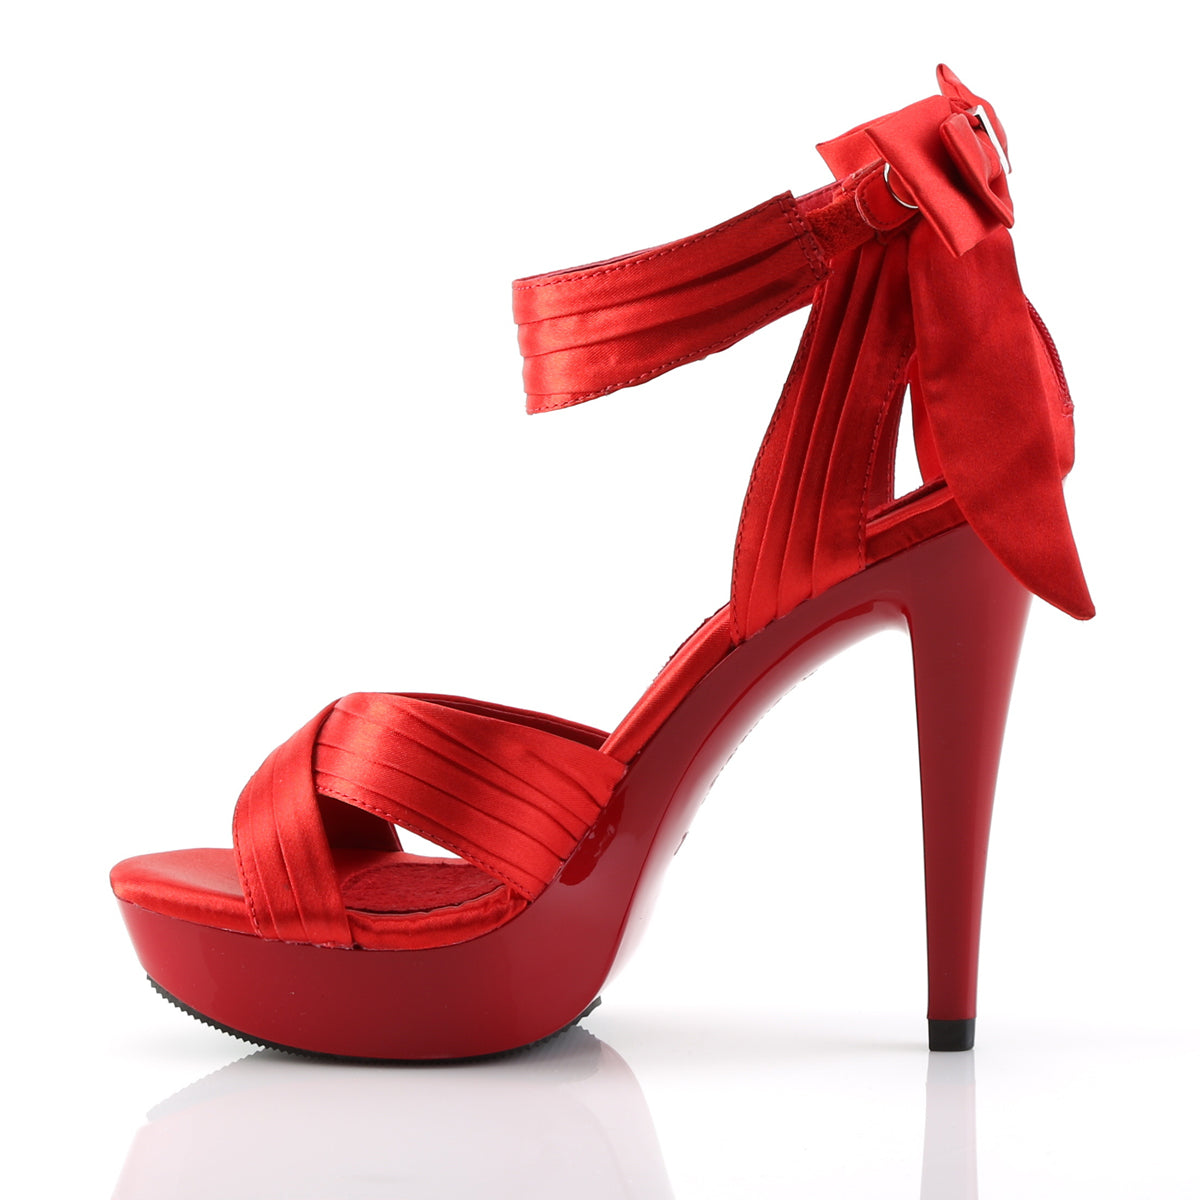 COCKTAIL-568 Red Satin/Red - size 10